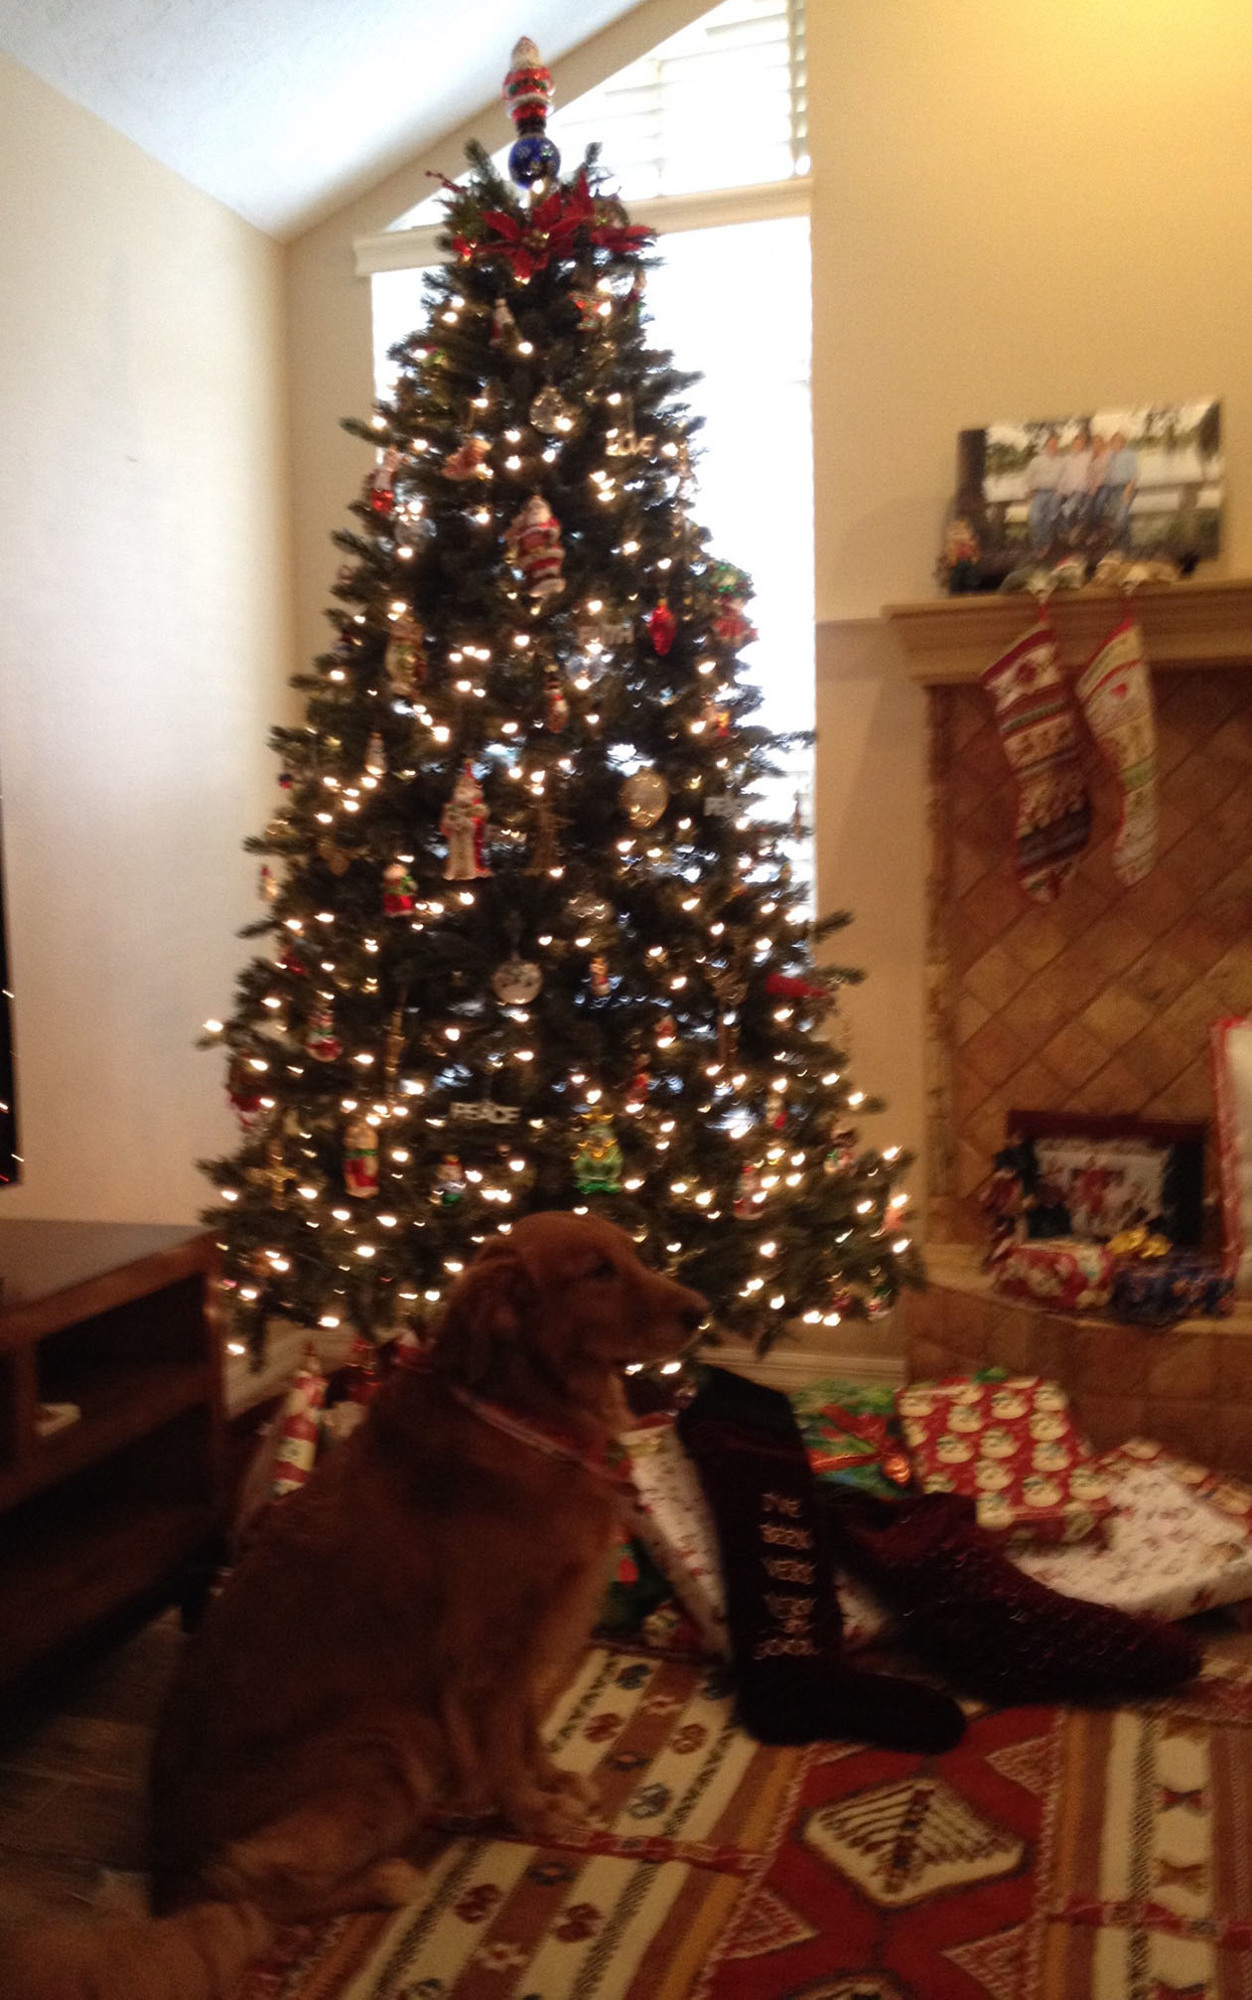 Shelby the dog stands guard in front of the Carter family's Christmas Tree. This year Shelby accidentally shattered the tree topper with her tail.